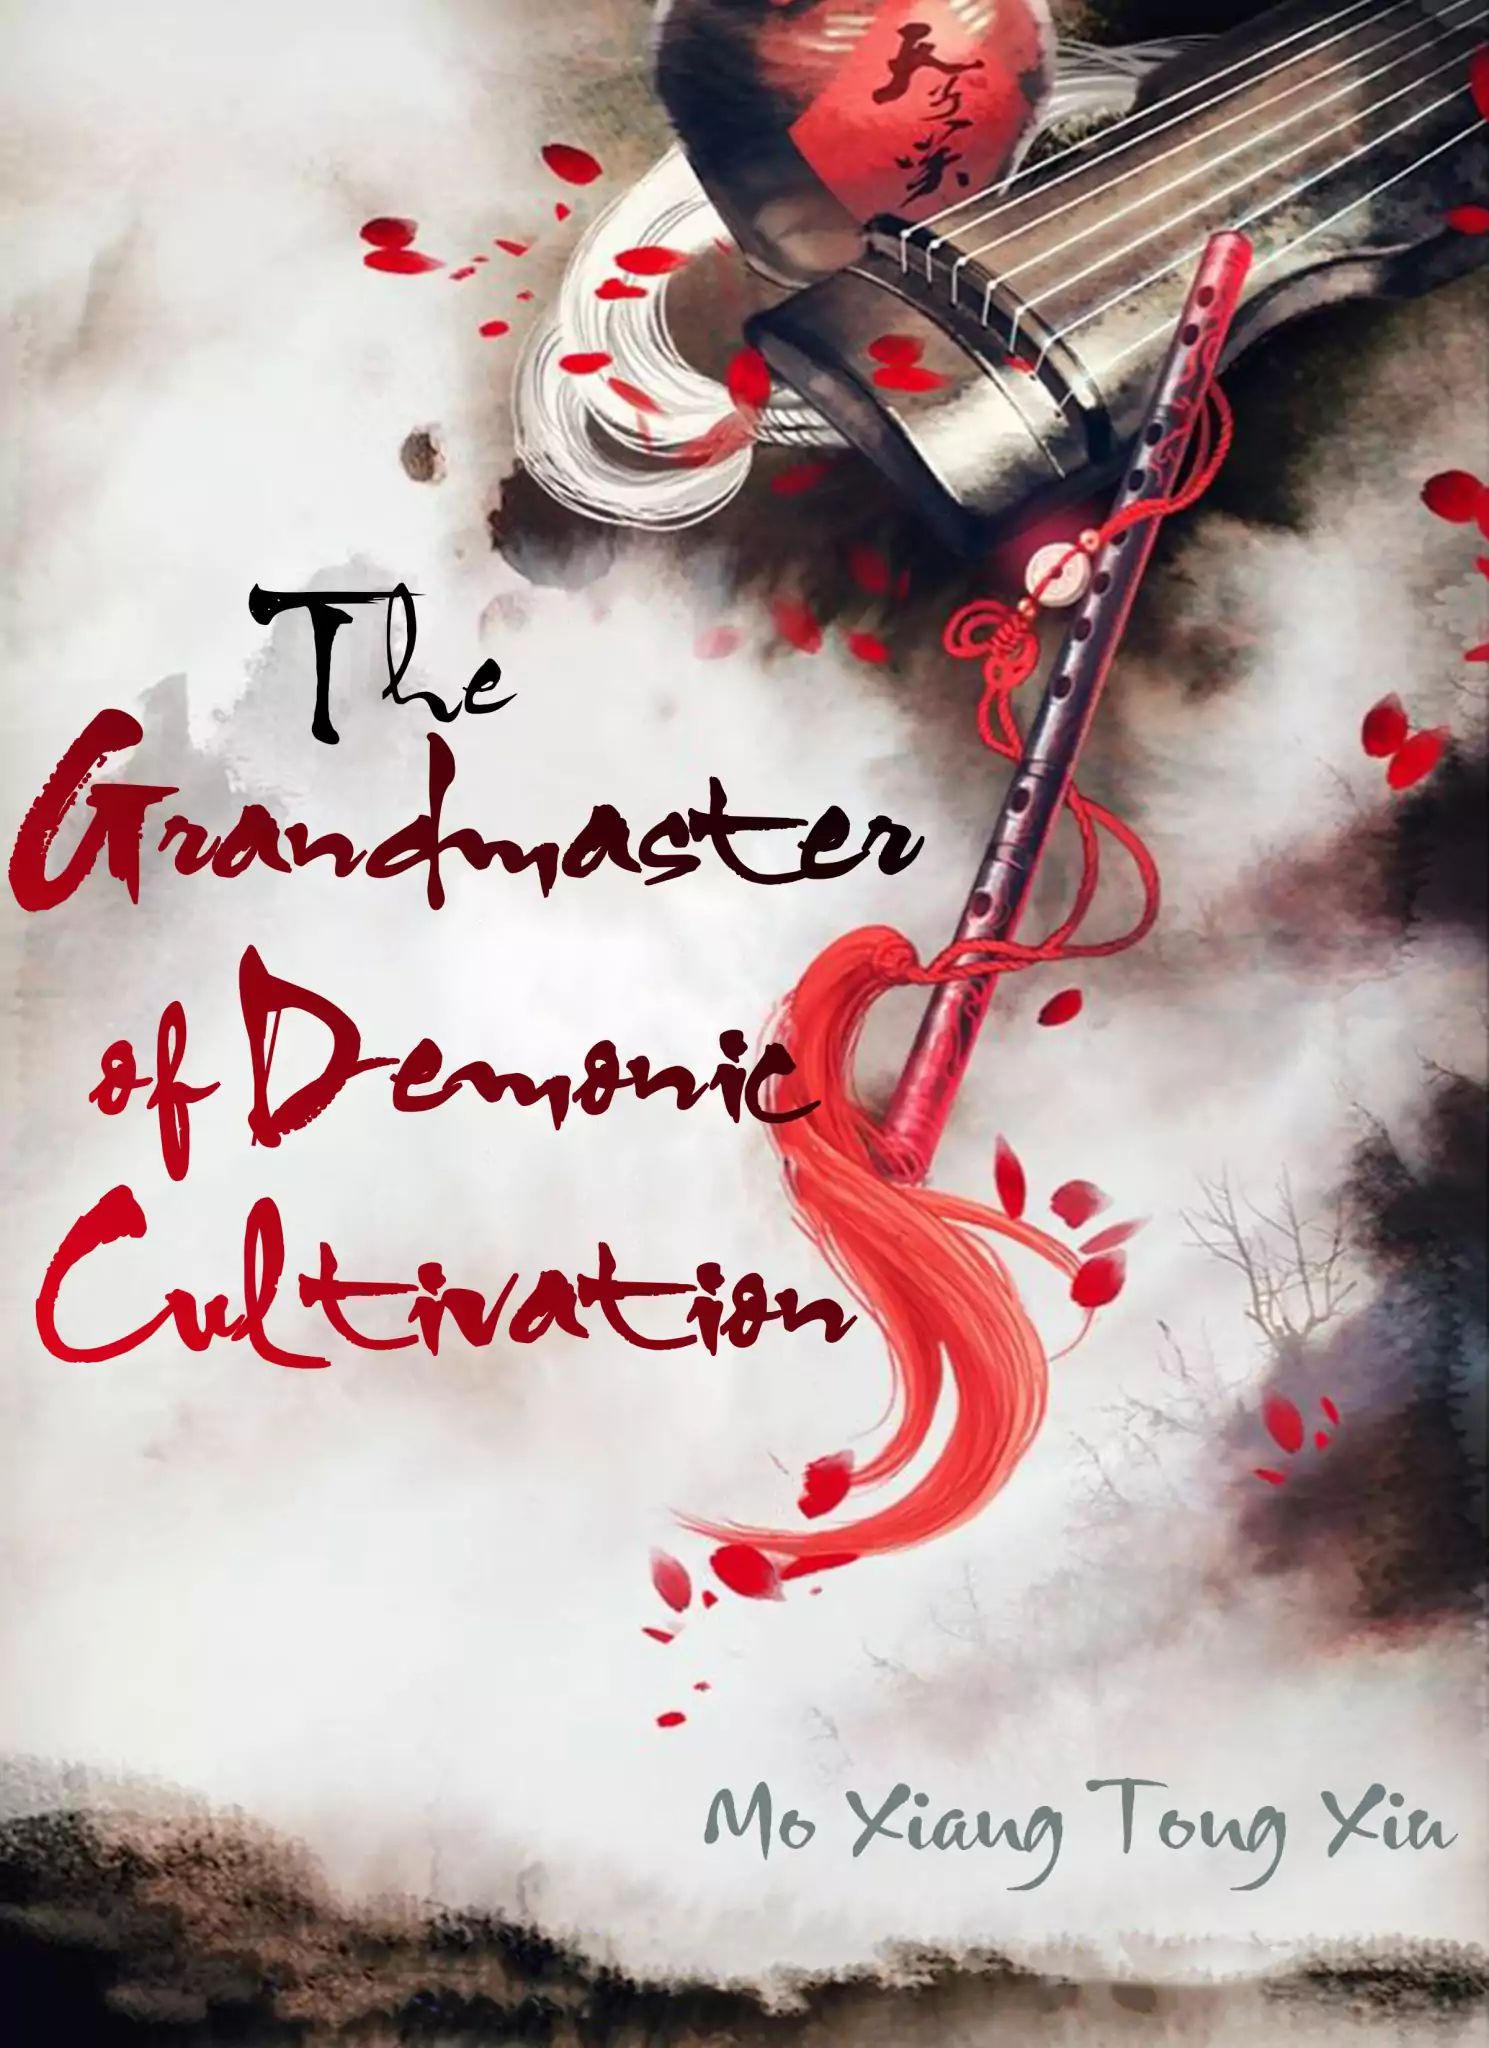 The Grandmaster of Demonic Cultivation Chapter 49